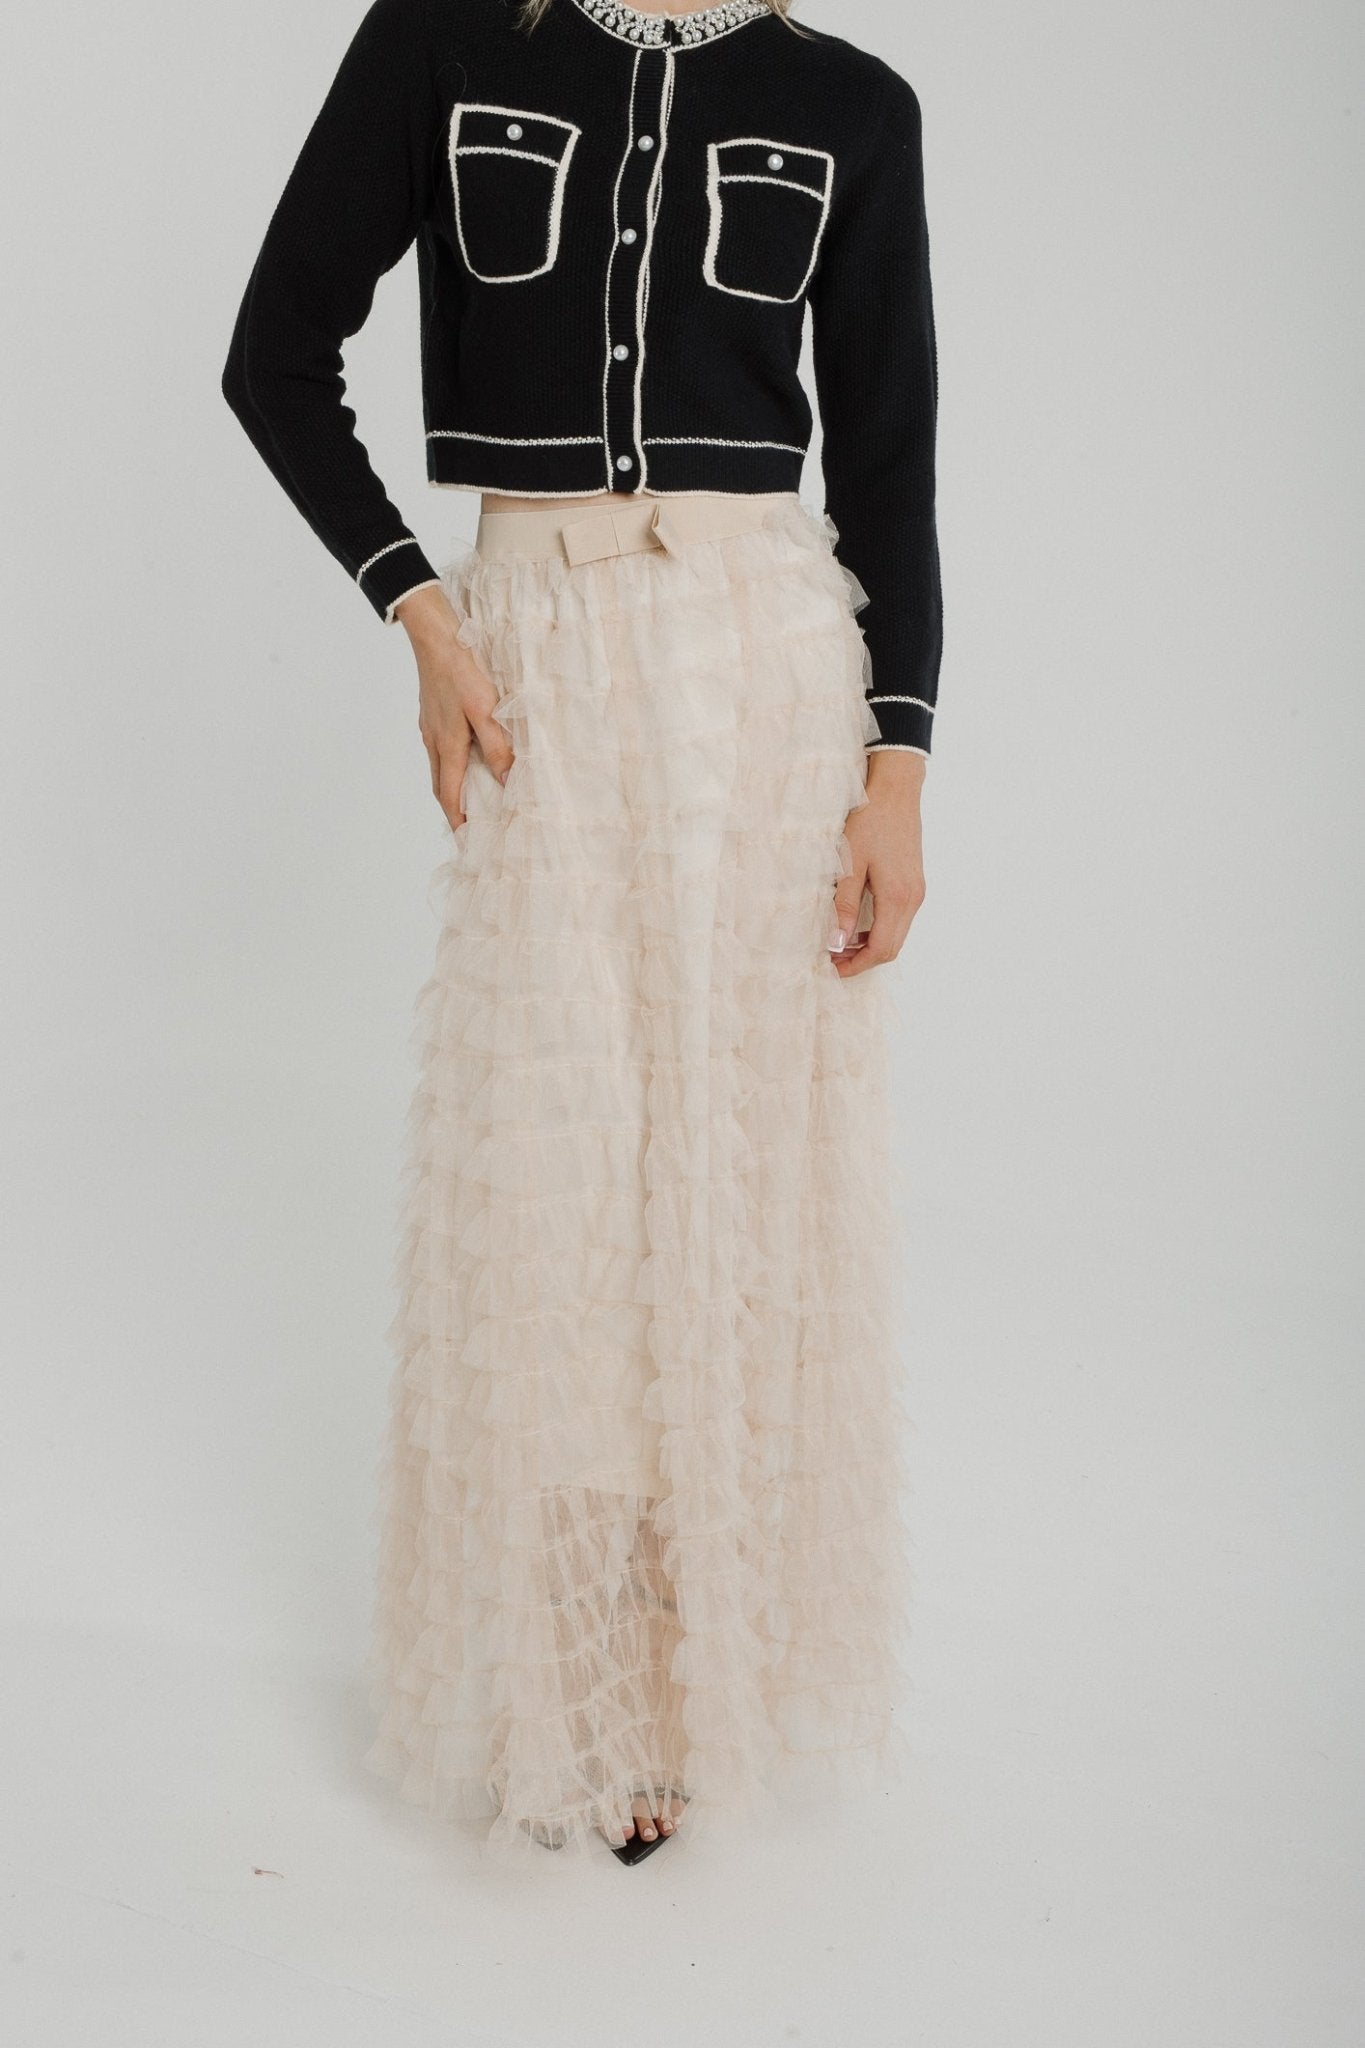 Polly Textured Tulle Maxi Skirt In Neutral - The Walk in Wardrobe